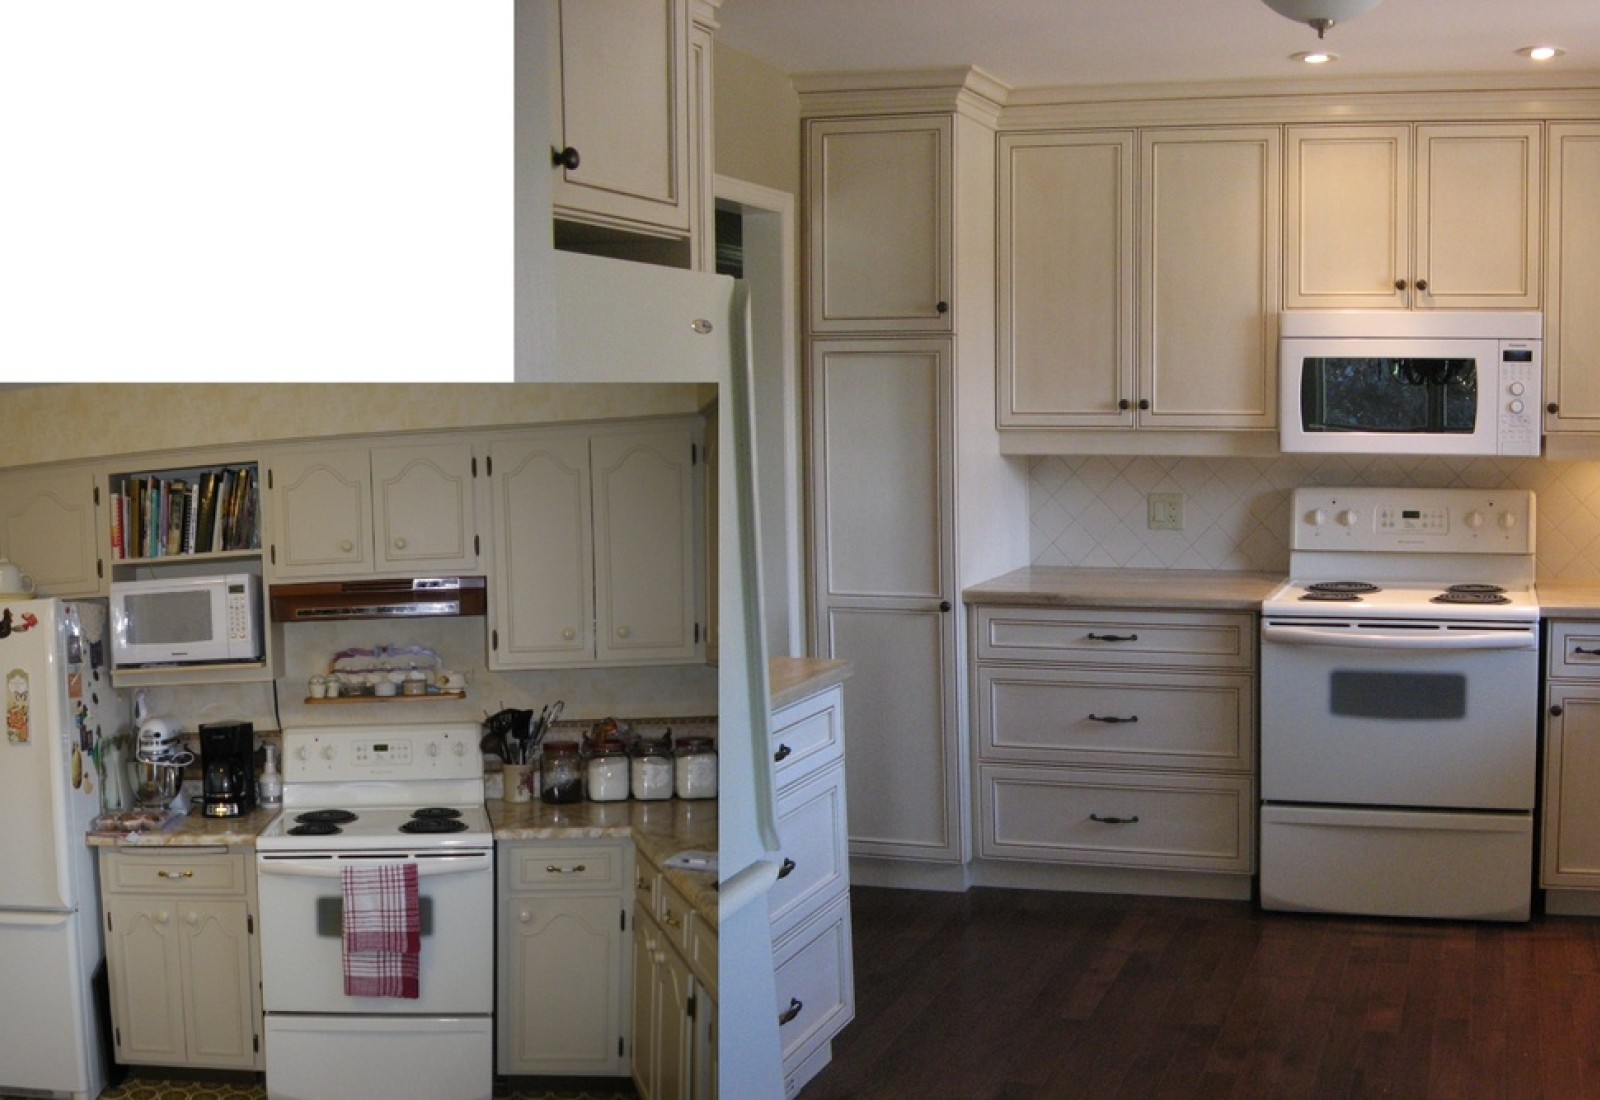 Before and after of the kitchen